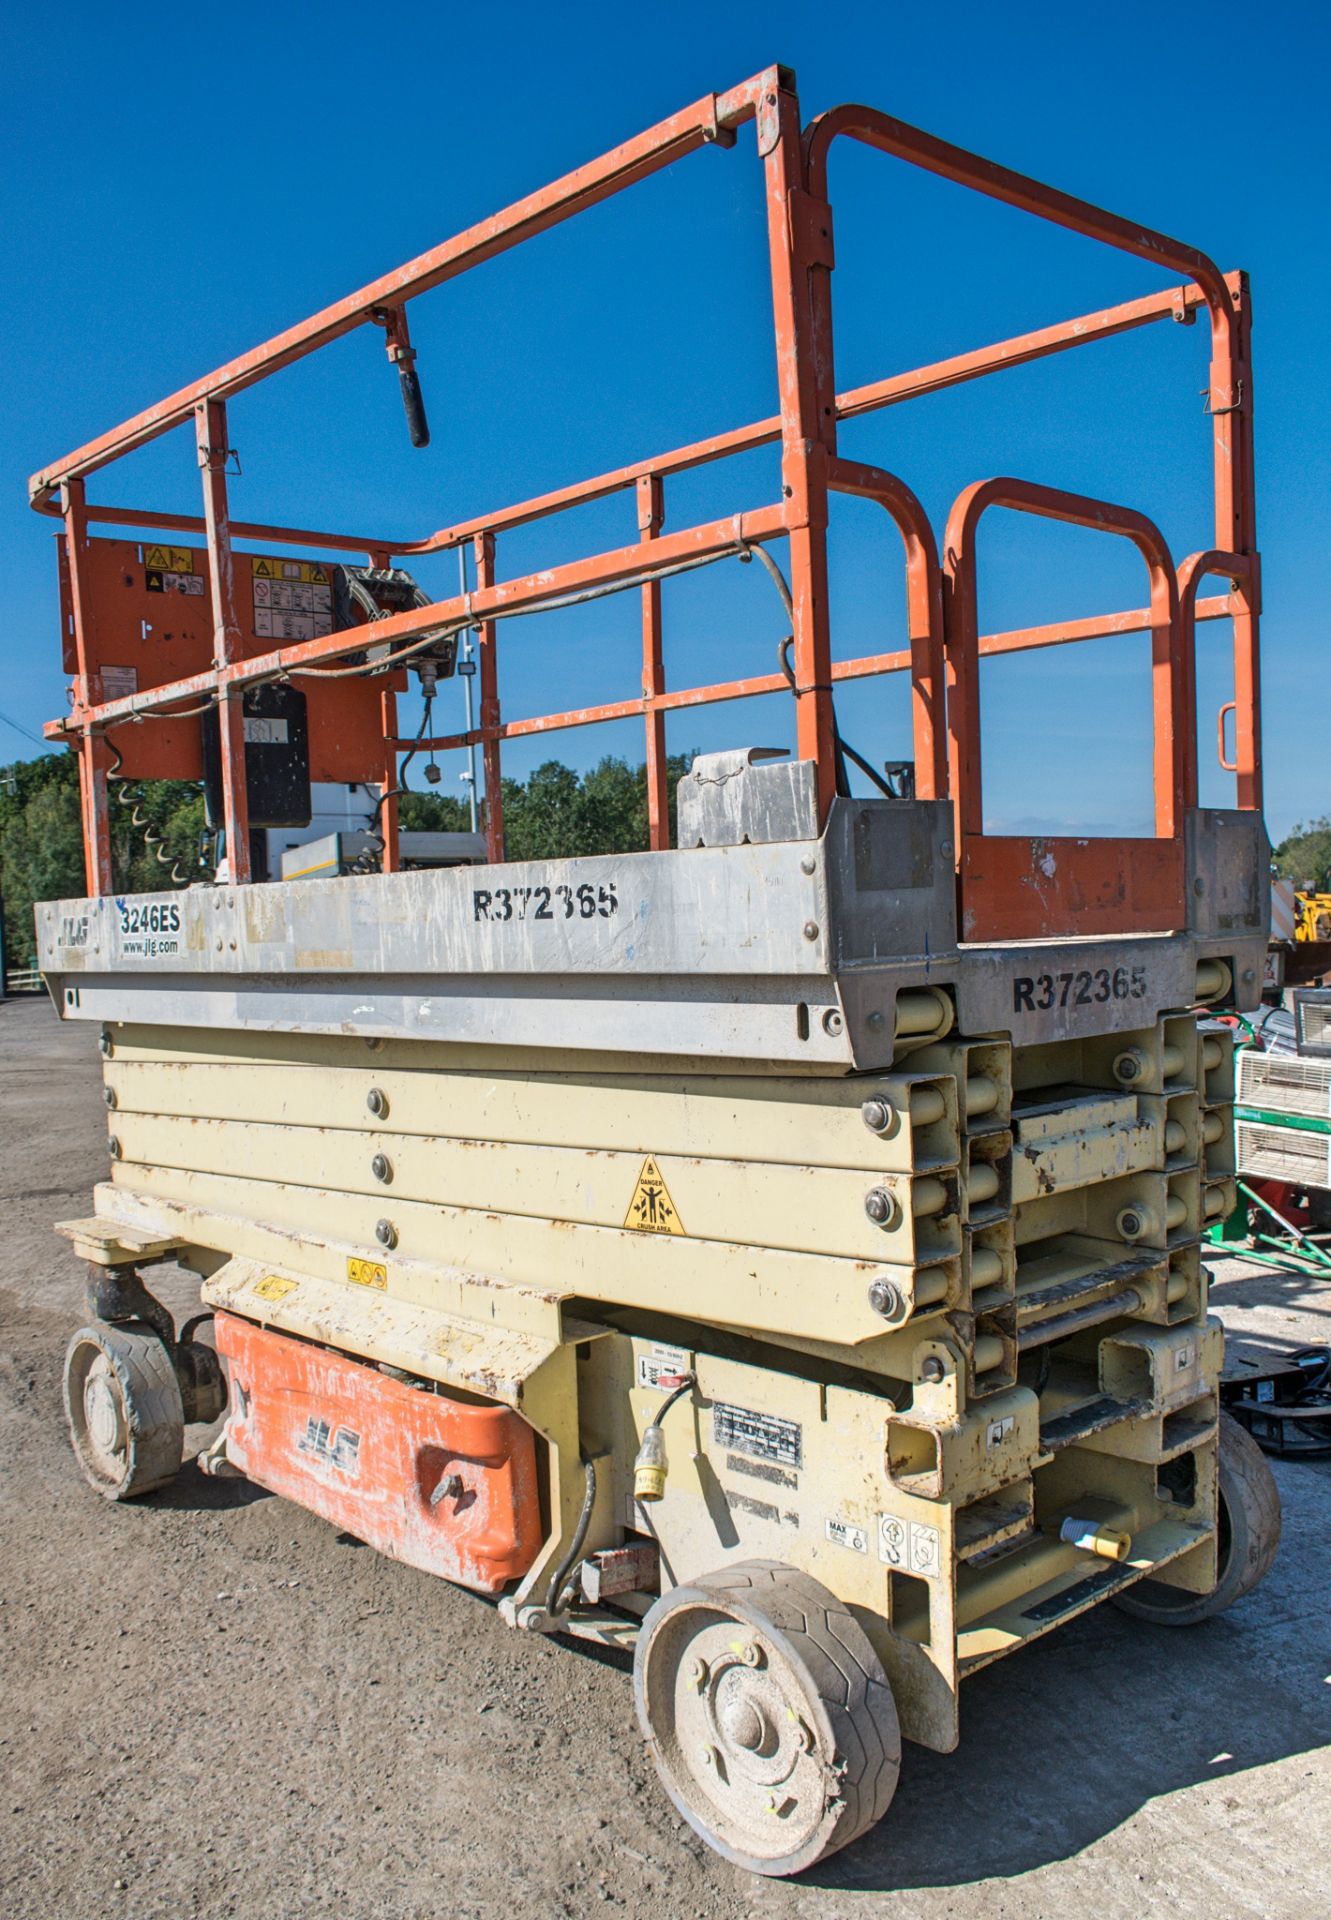 JLG 3246ES battery electric scissor lift Year: 2011 S/N: 024366 Recorded Hours: 212 R372365 - Image 2 of 9